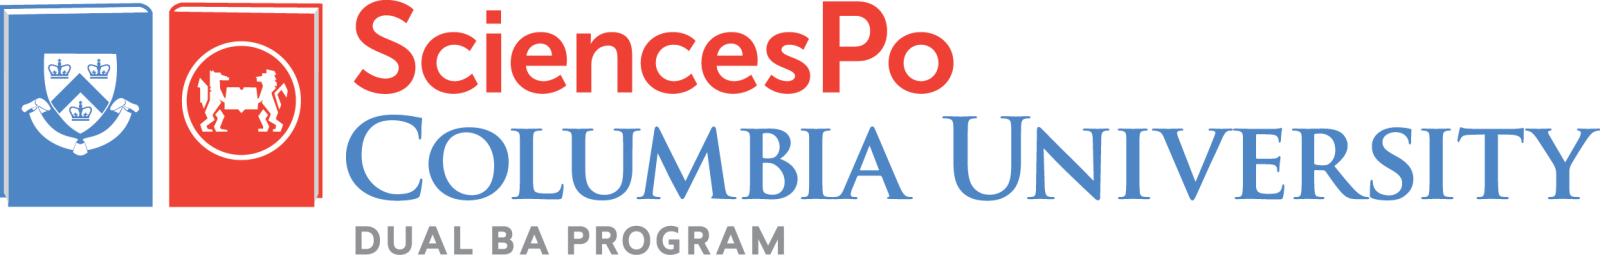 Logo for the Dual BA Program Between Columbia University and Sciences Po